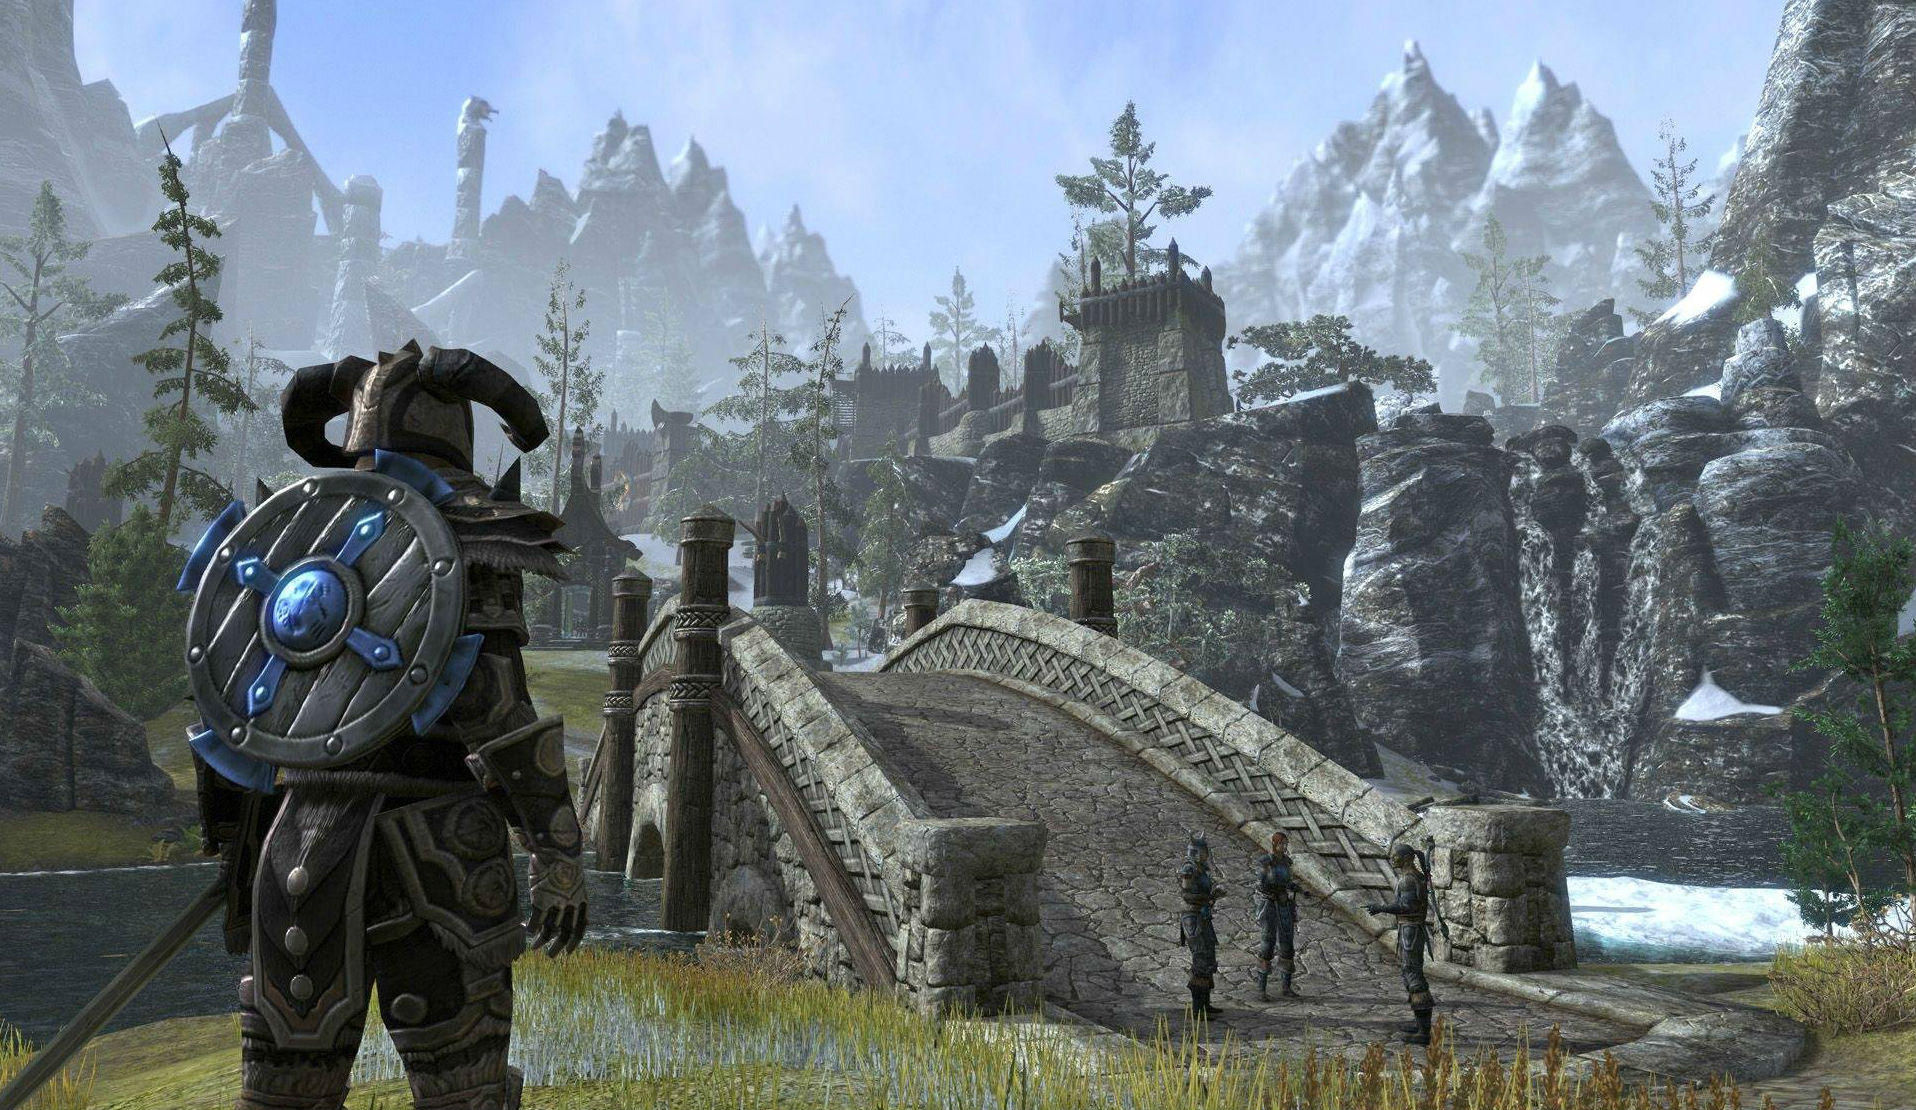 A still from The Elder Scrolls Online: Tamriel Unlimited, available now for Playstation 4 and Xbox One consoles.